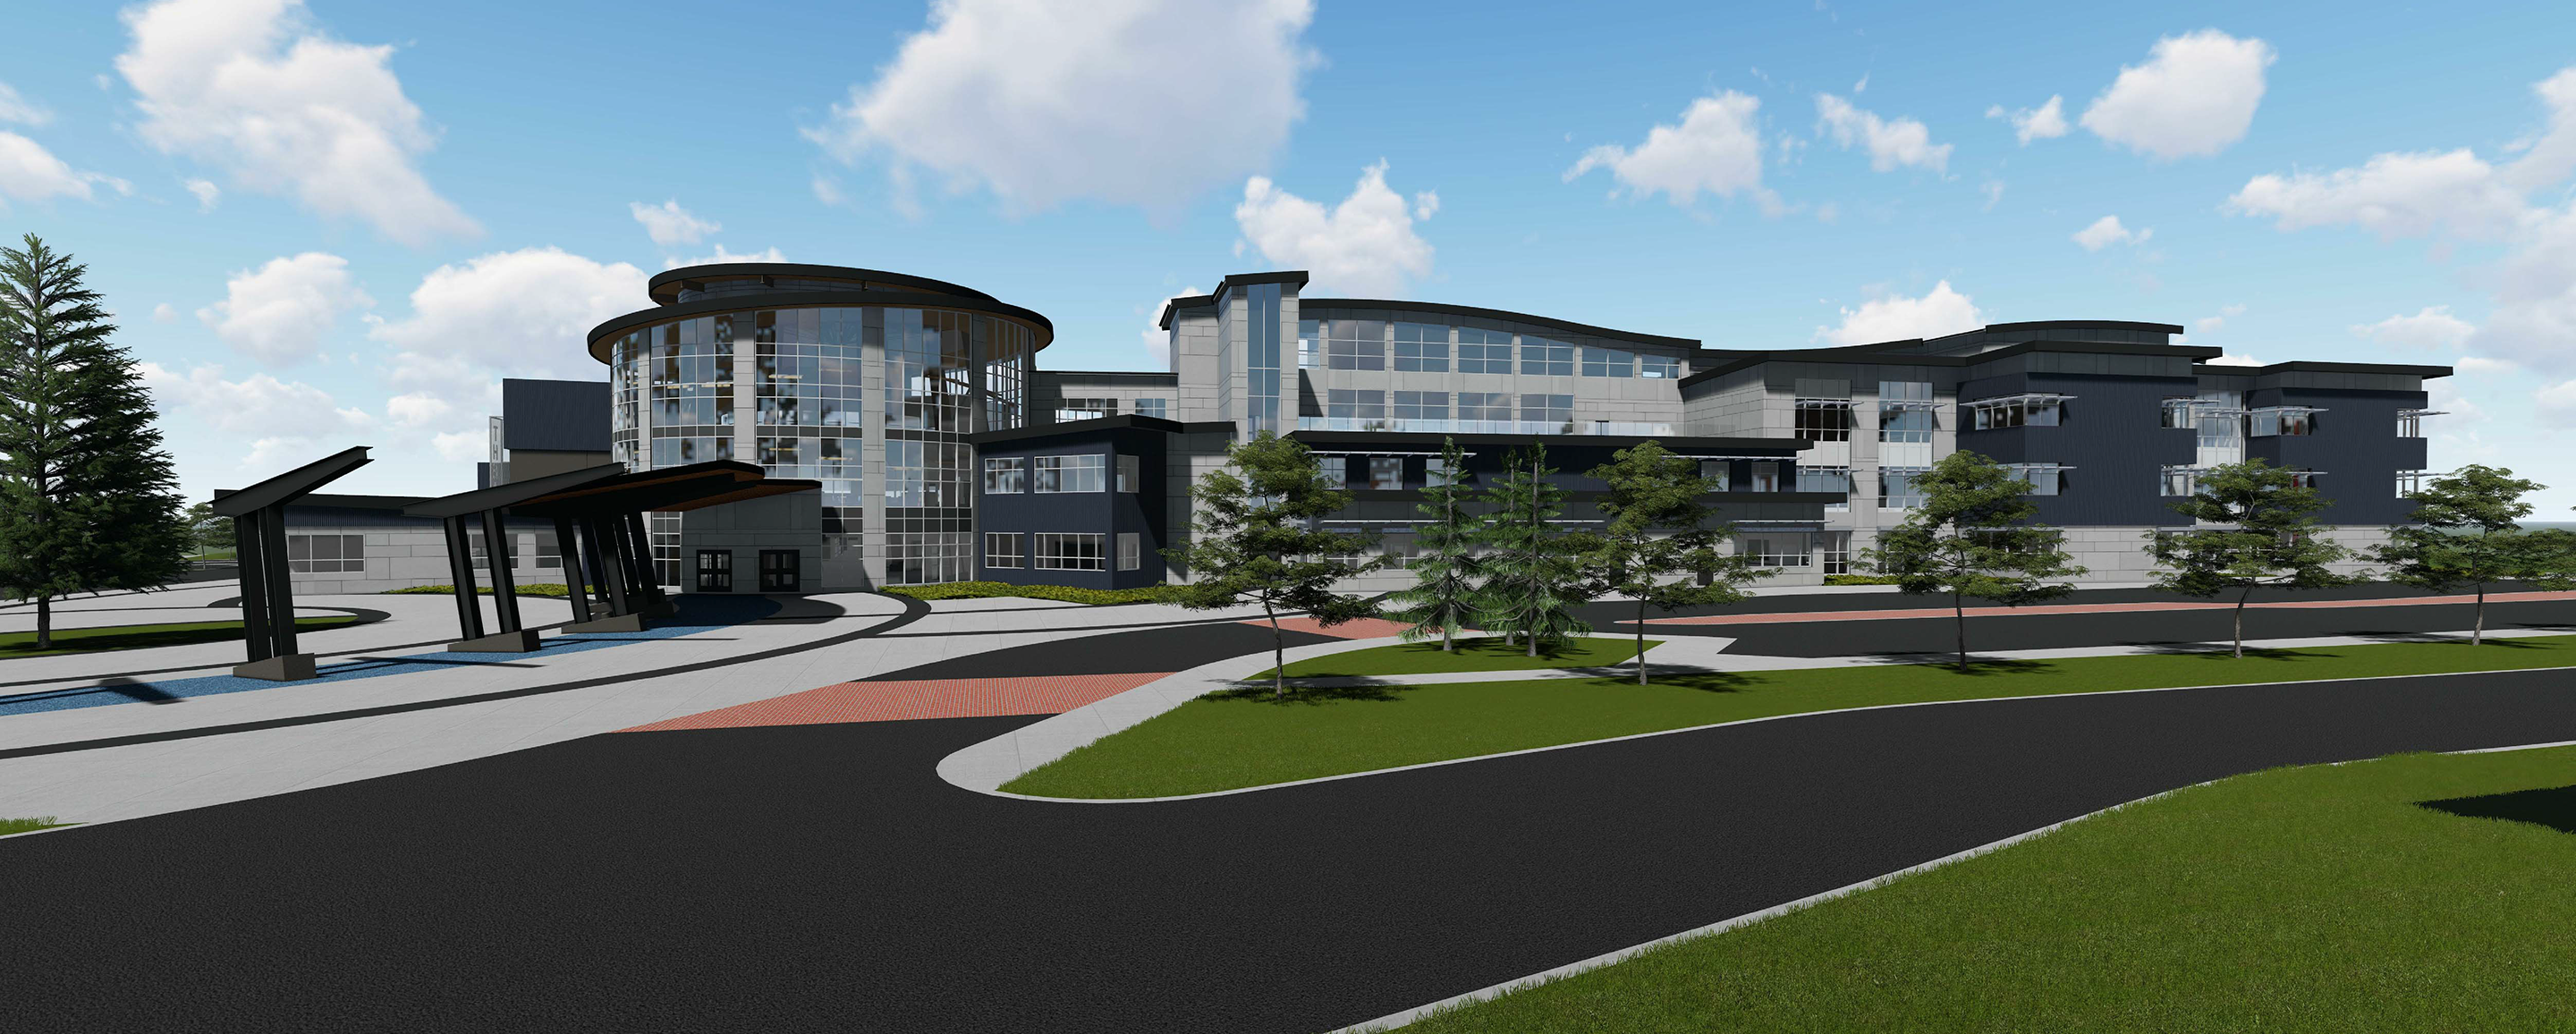 grandview-heights-secondary-rendering.6f816c64578.png